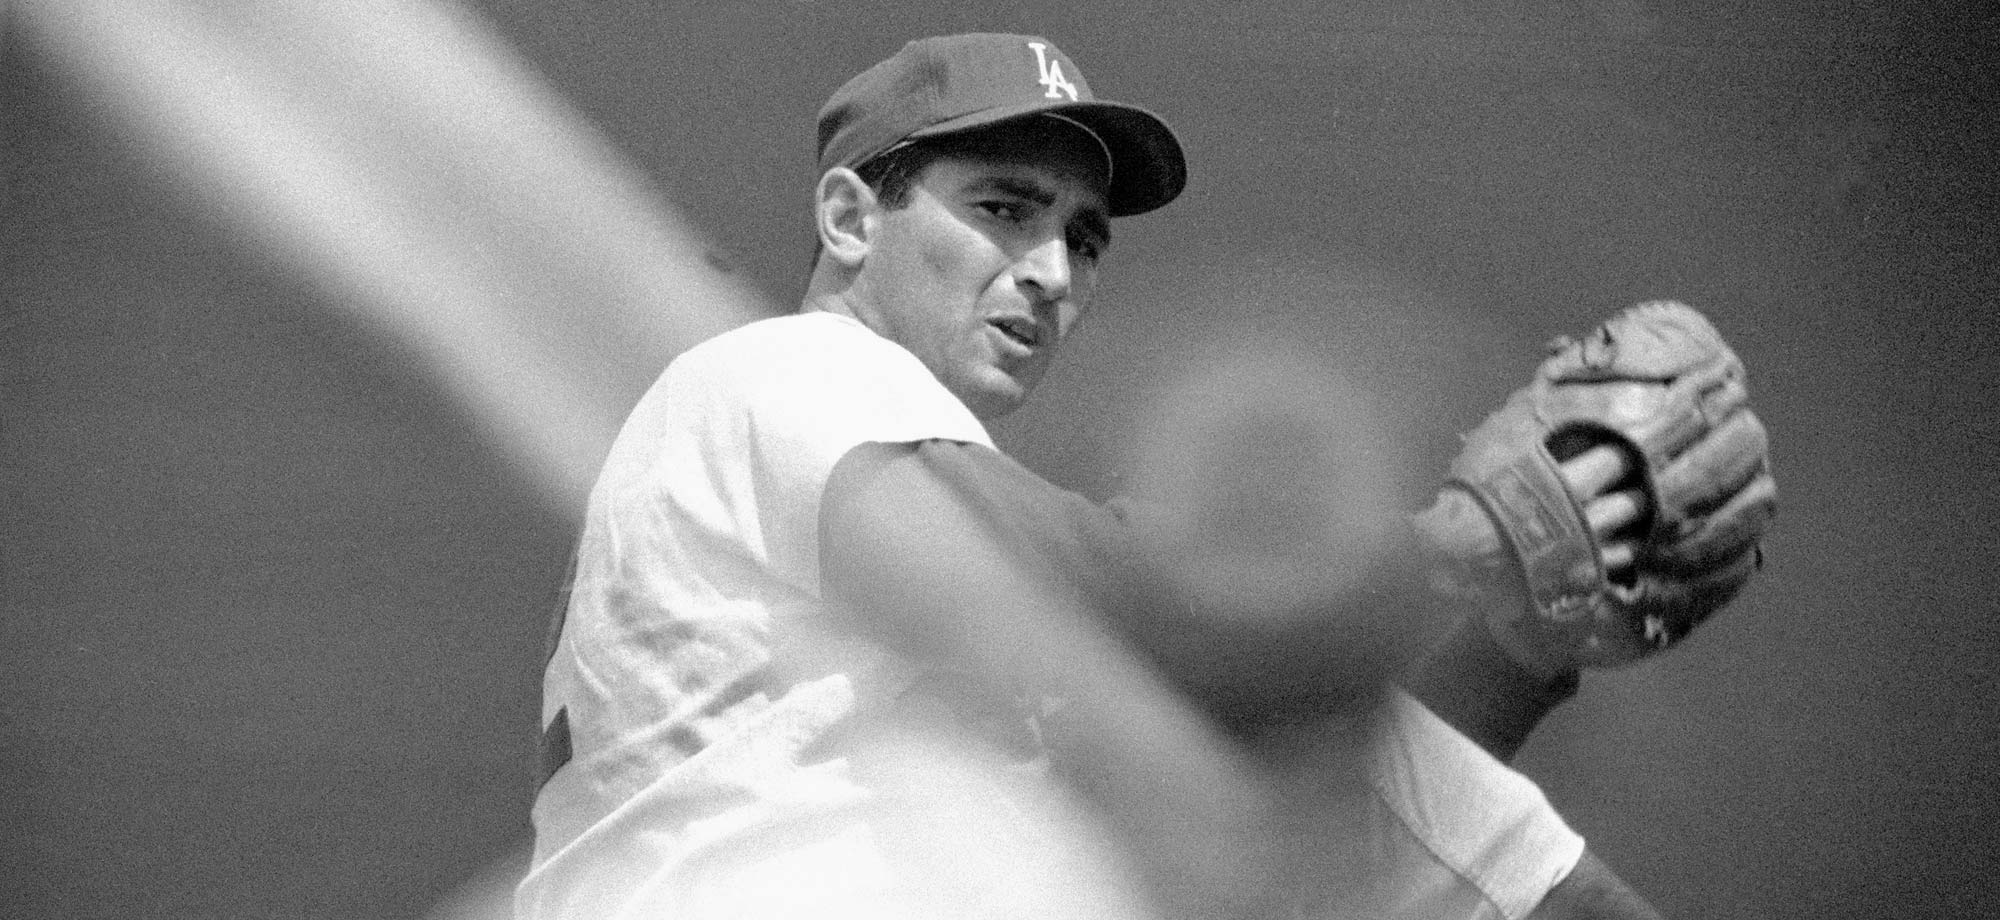 Classic SI Photos of Sandy Koufax - Sports Illustrated